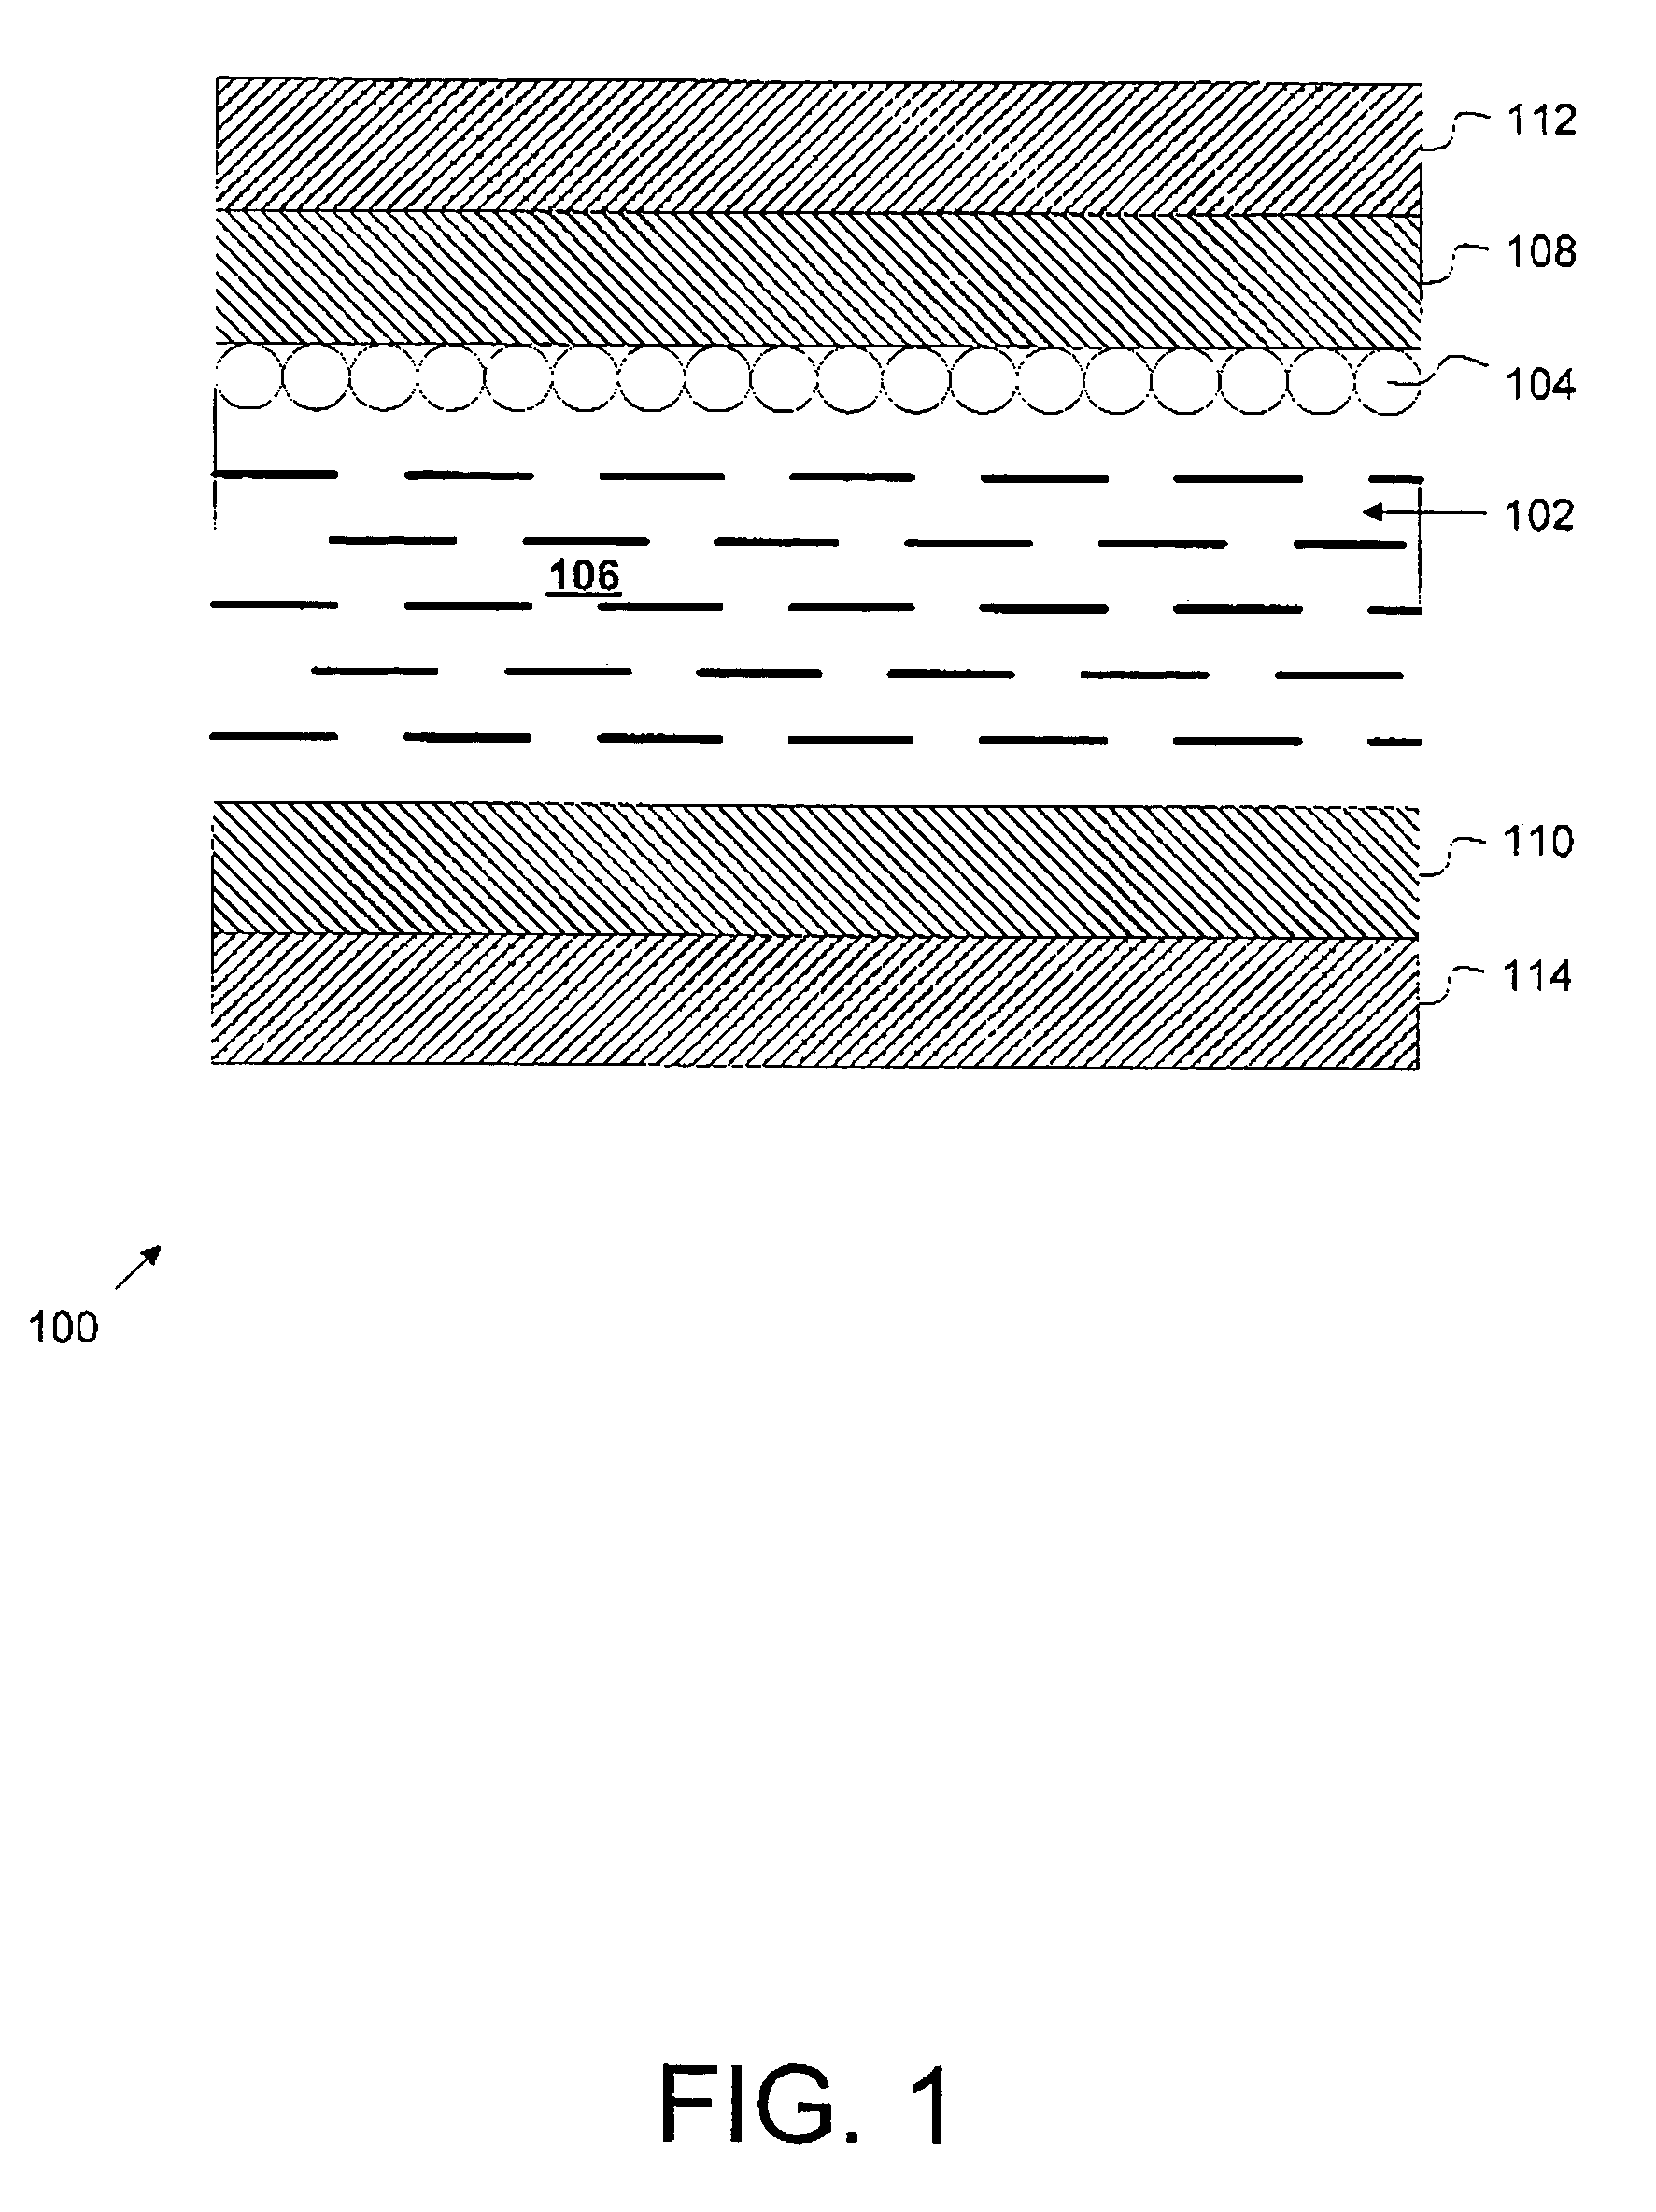 Electrophoretic display with thermal control